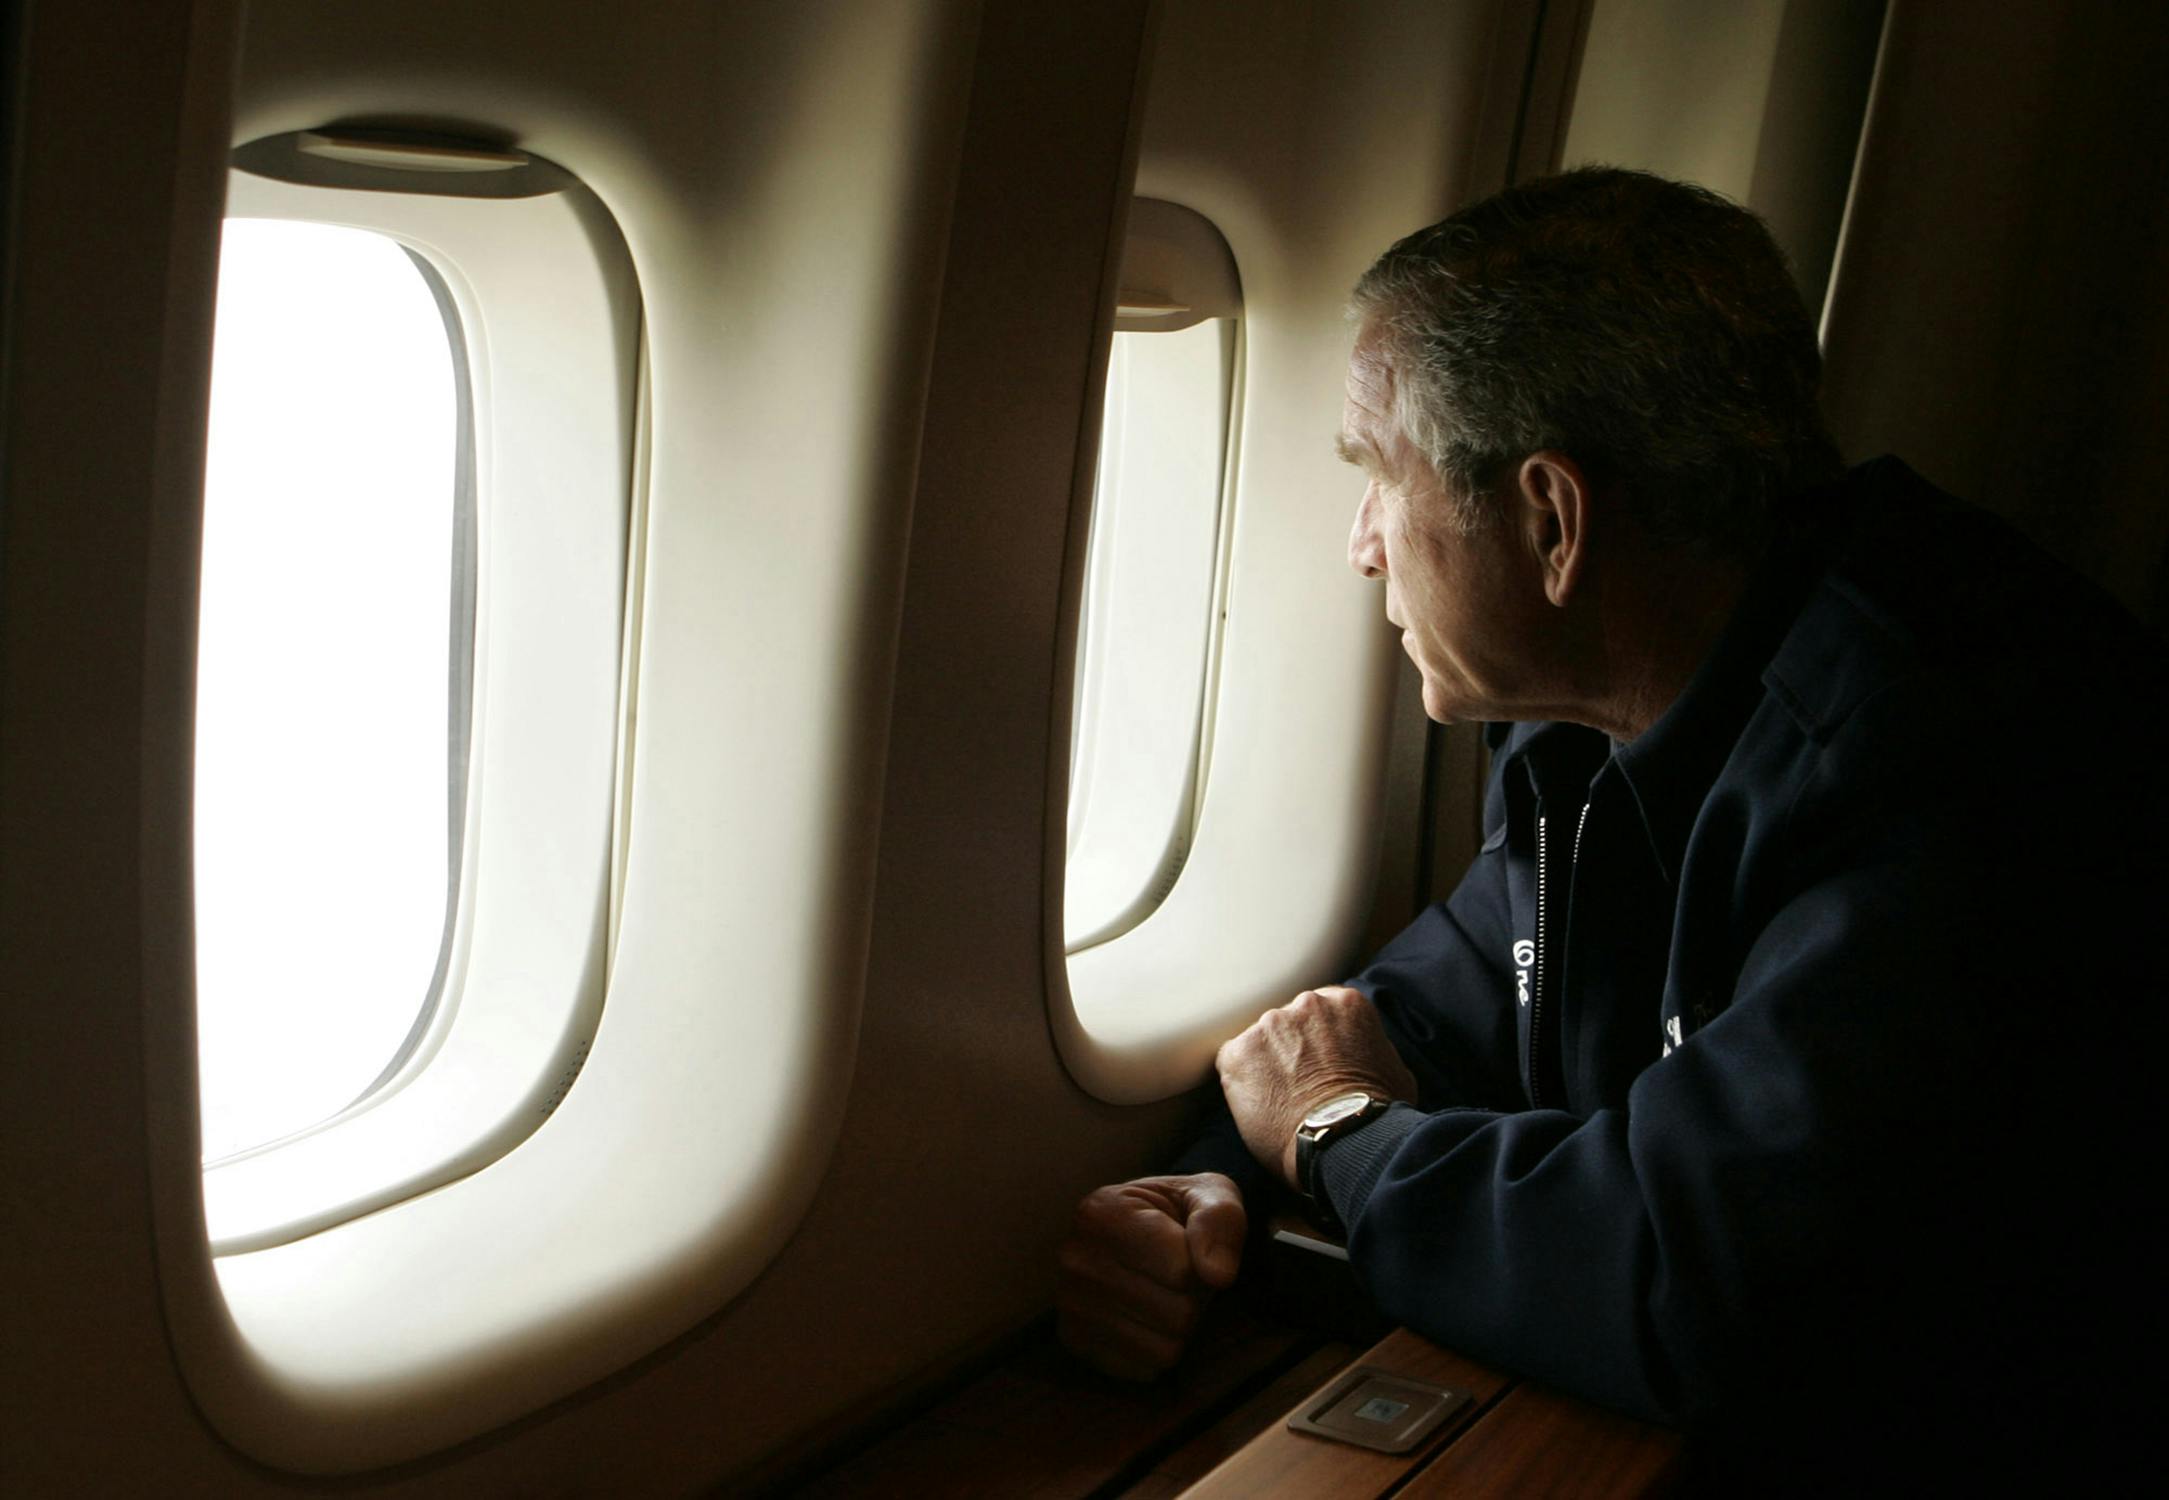 President Bush looks out the window of Air Force One